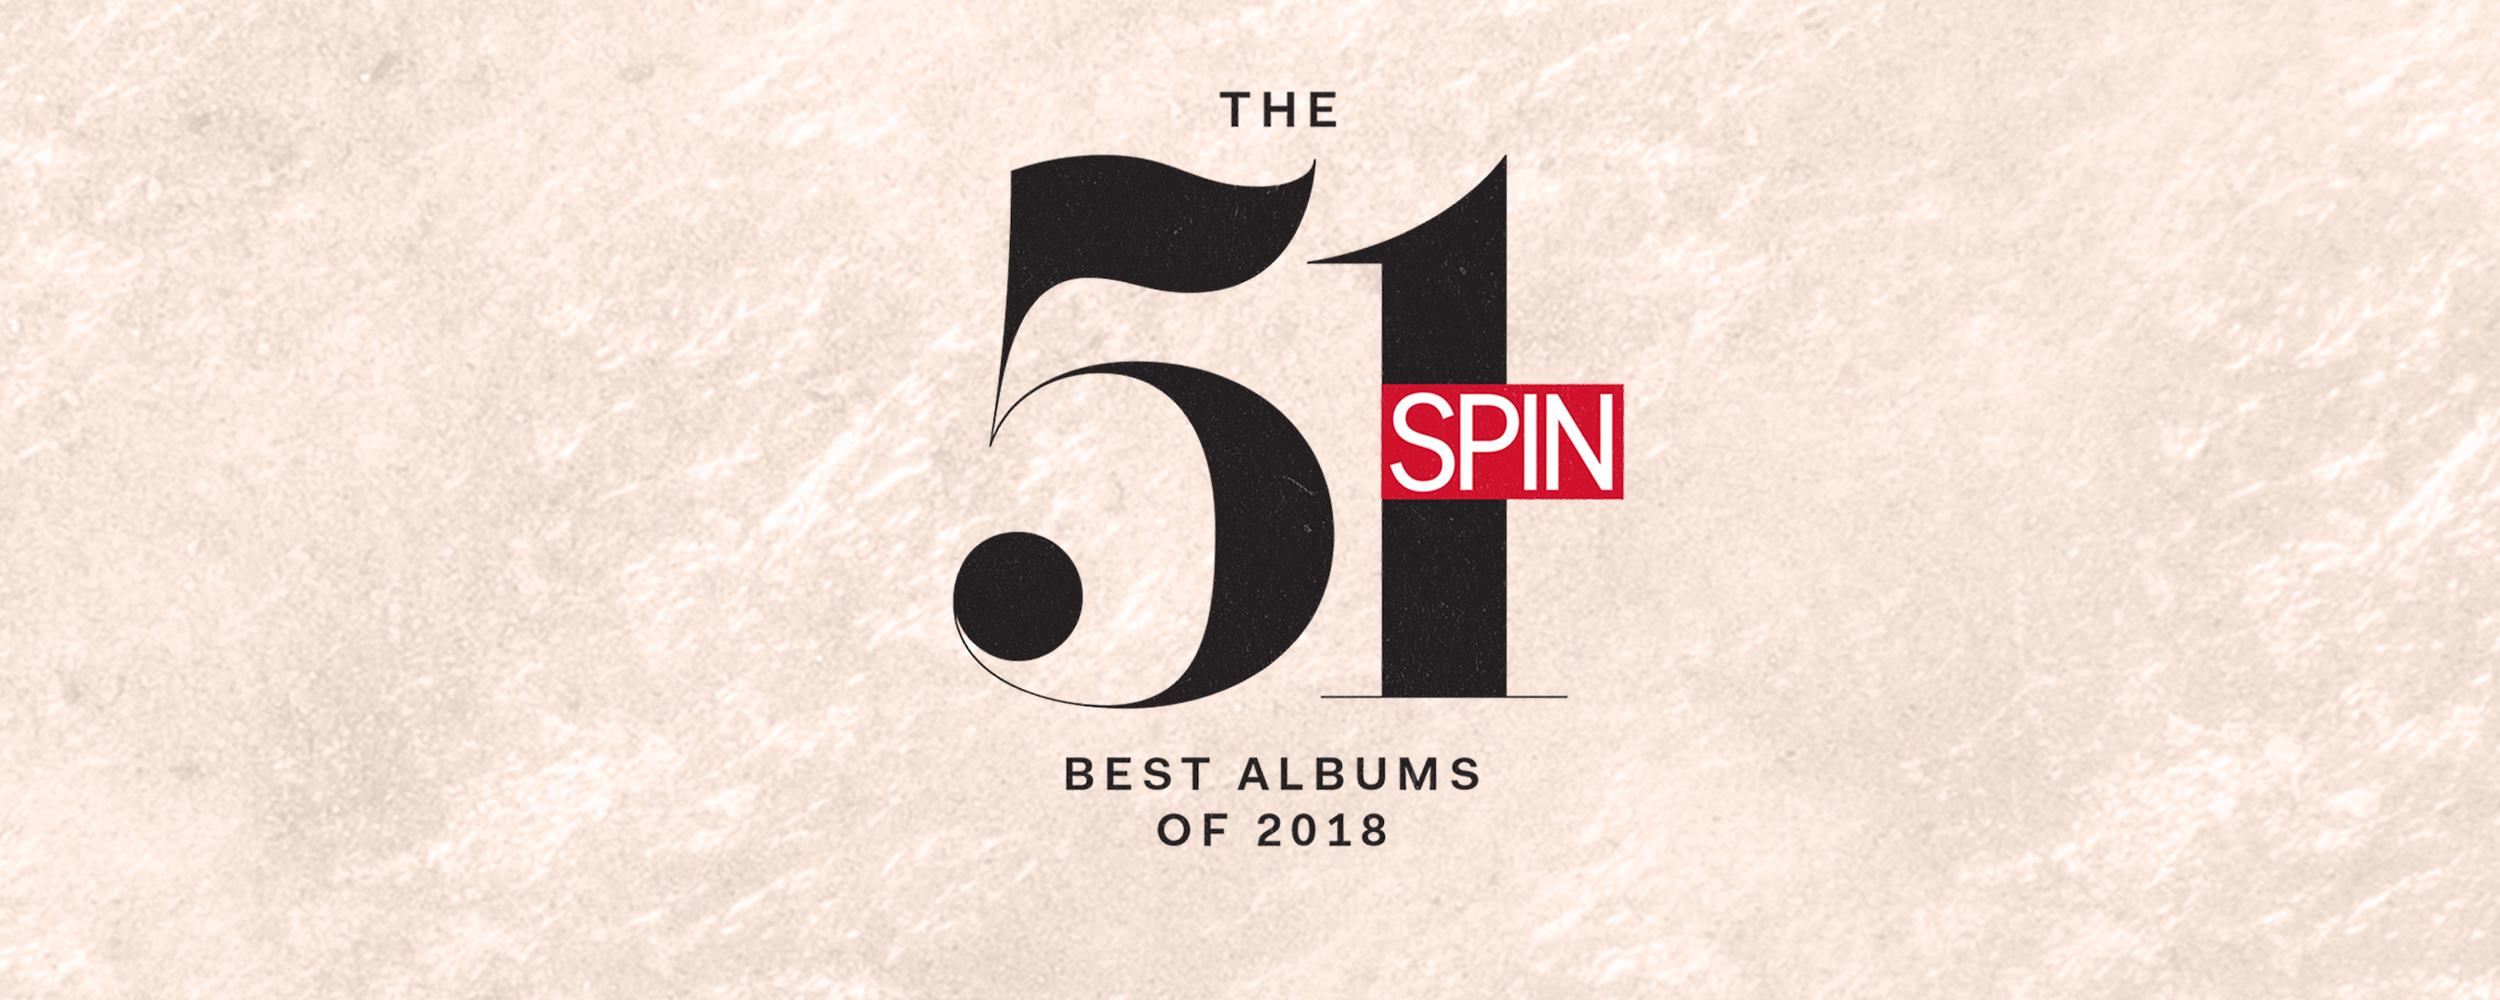 best albums of the year 2018 spin list staff picks ranked